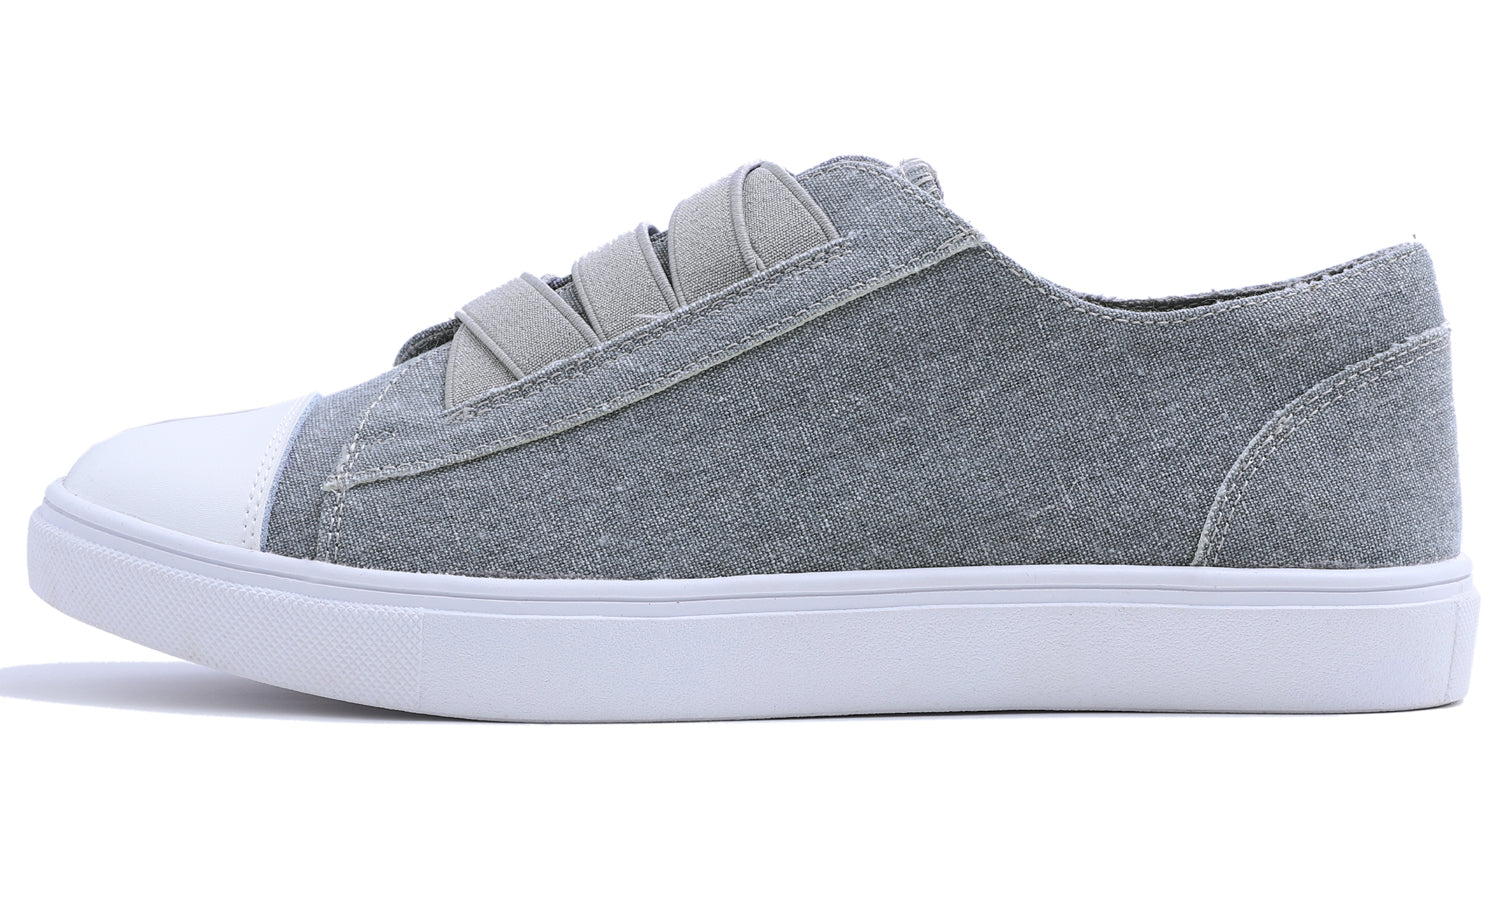 Feversole Women's Casual Slip On Sneaker Comfort Cupsole Loafer Flats Fashion Canvas Easy Elastic Low Top Grey